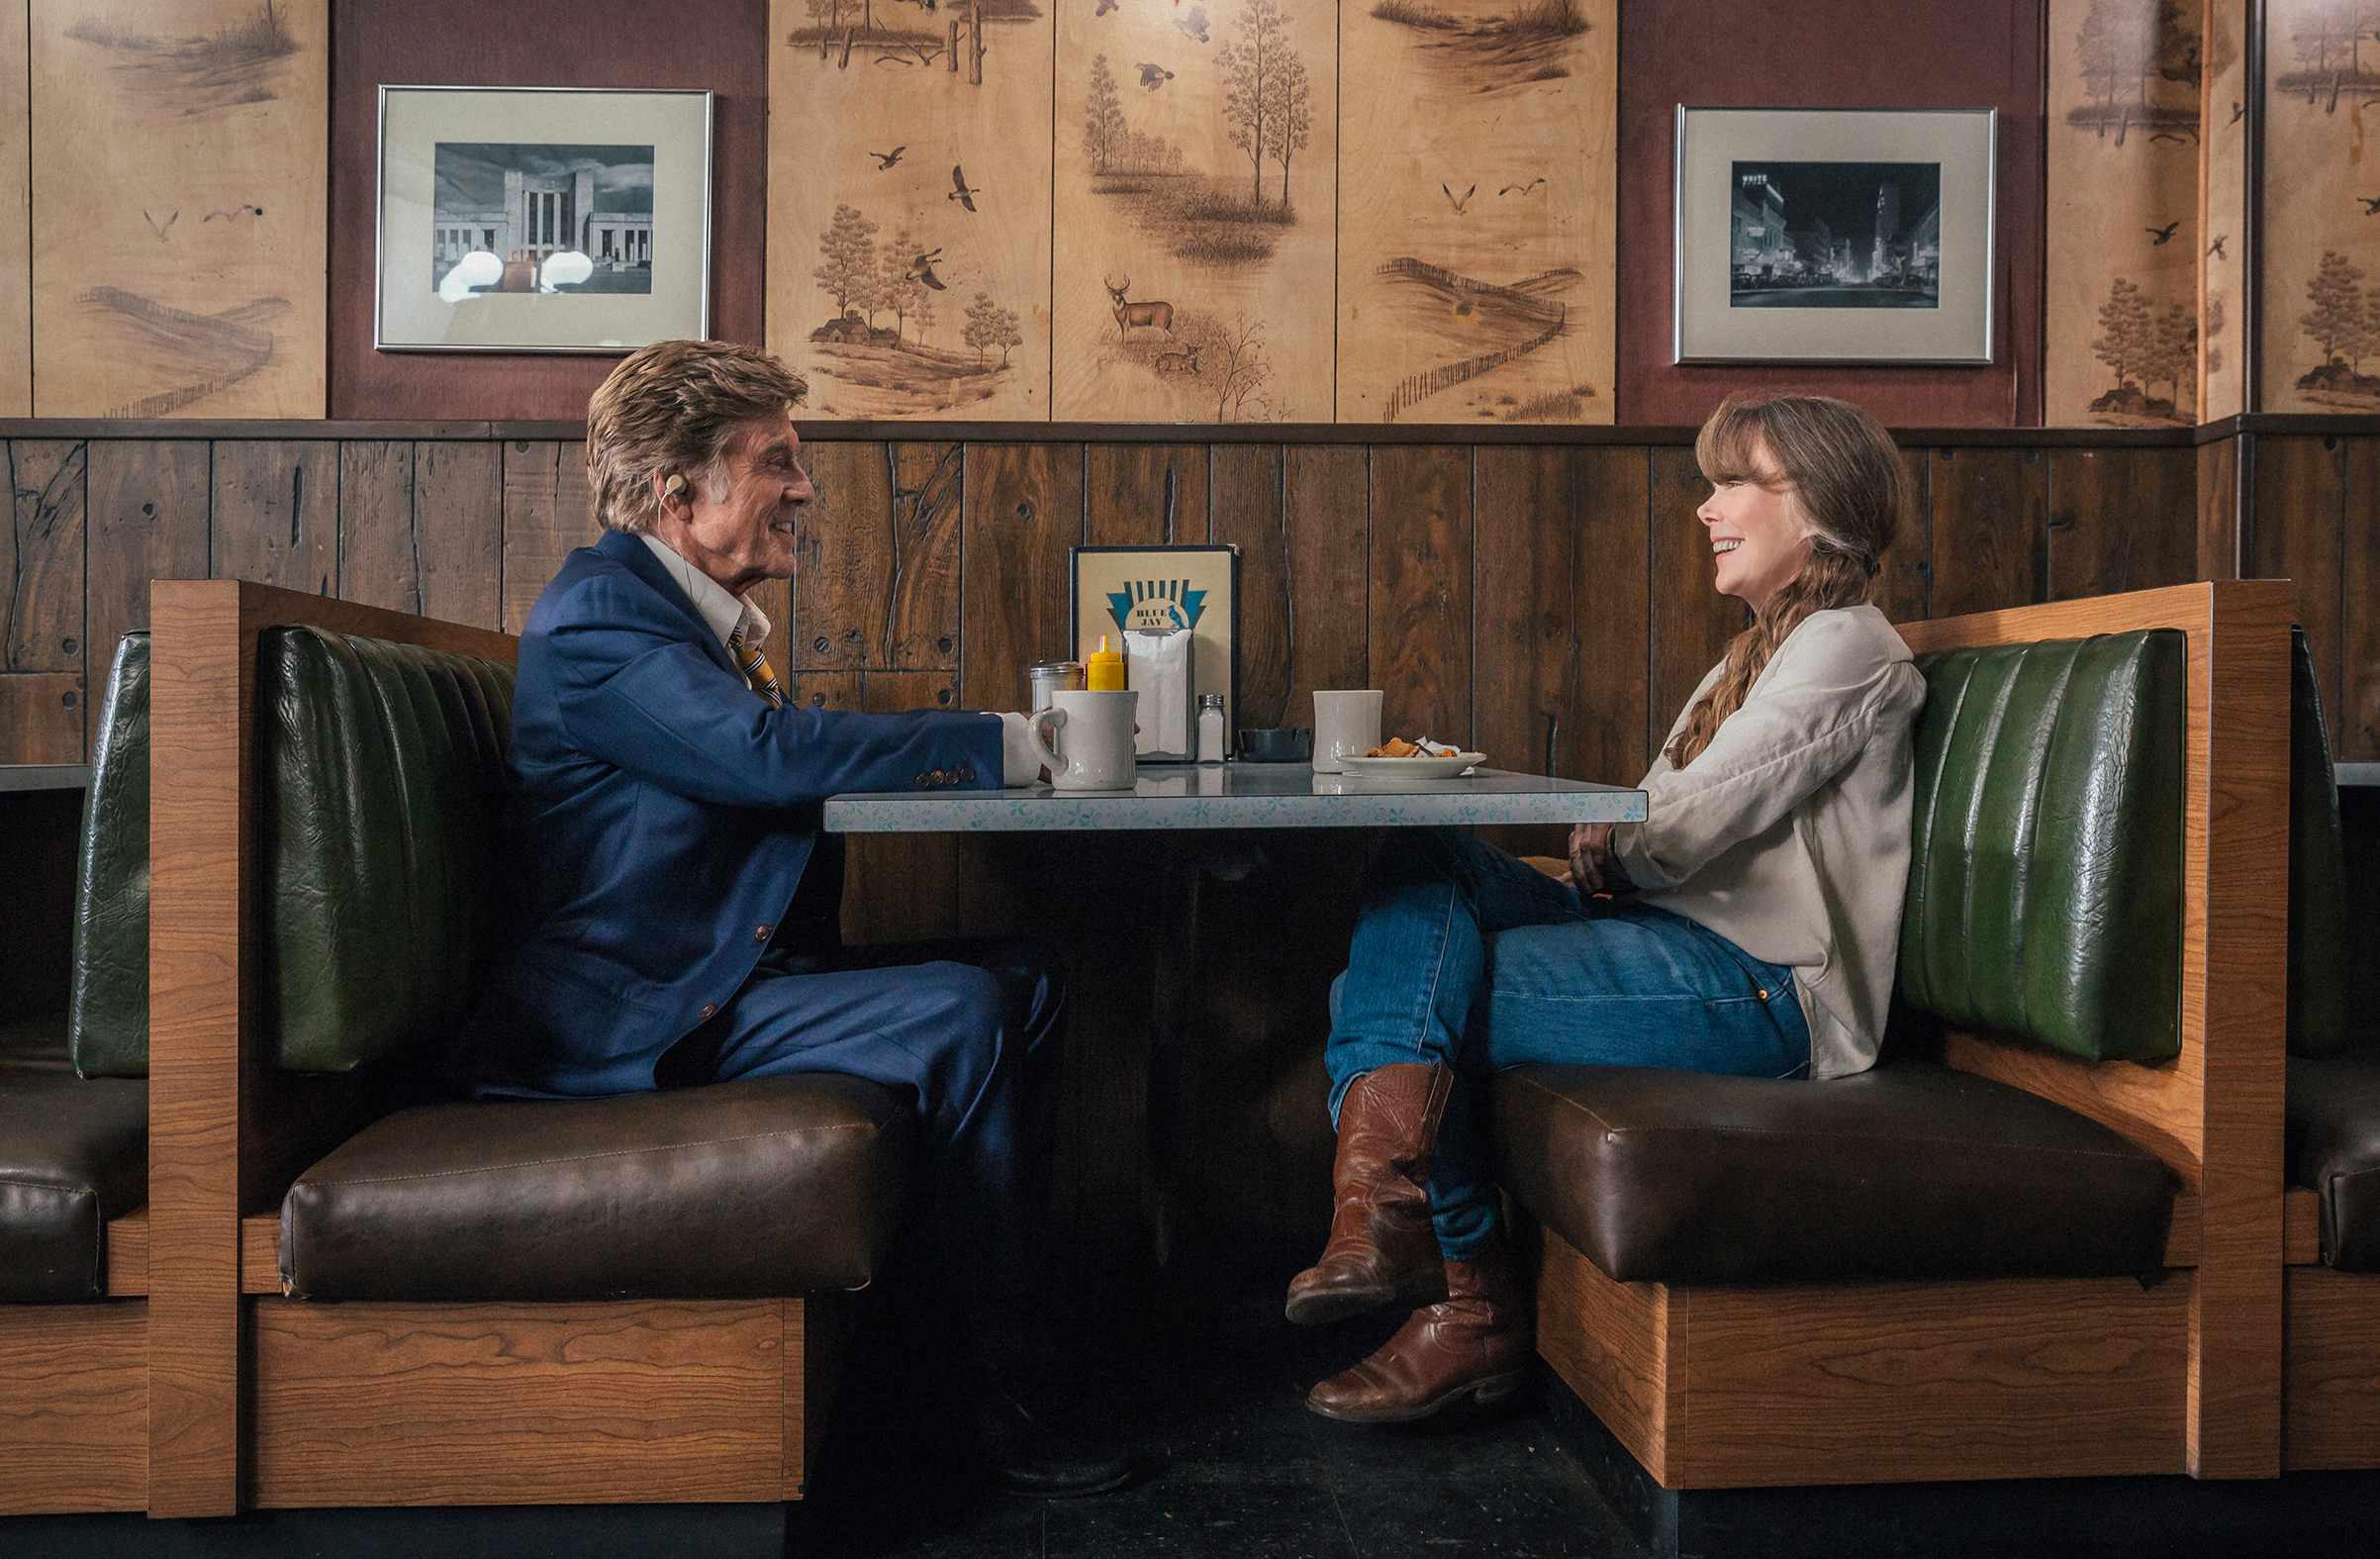 Robert Redford as "Forrest Tucker" and Sissy Spacek as "Jewel" in the film THE OLD MAN &amp; THE GUN. Photo by Eric Zachanowich. © 2018 Twentieth Century Fox Film Corporation All Rights Reserved (Photo by Eric Zachanowich—© 2018 Twentieth Century Fox Film Corporation All Rights Reserved)